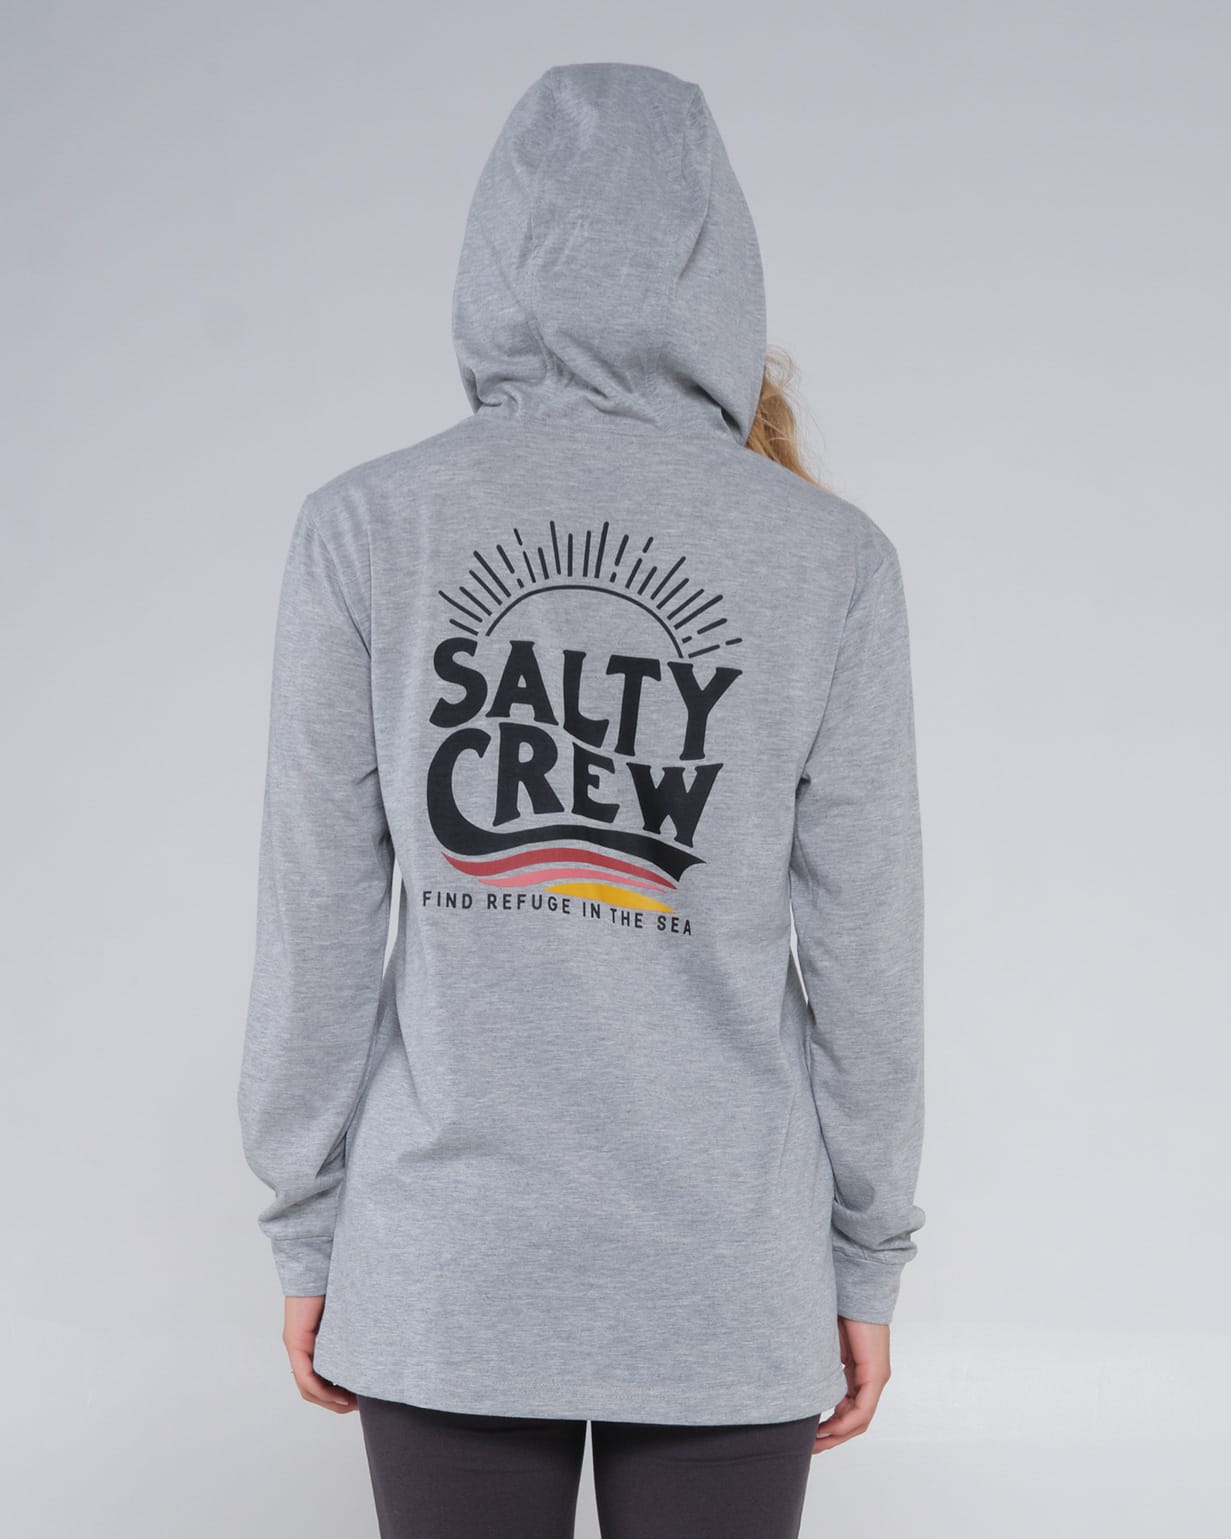 Salty crew SUN PROTECTION THE WAVE MID WEIGHT HOODY - Athletic Heather in Athletic Heather